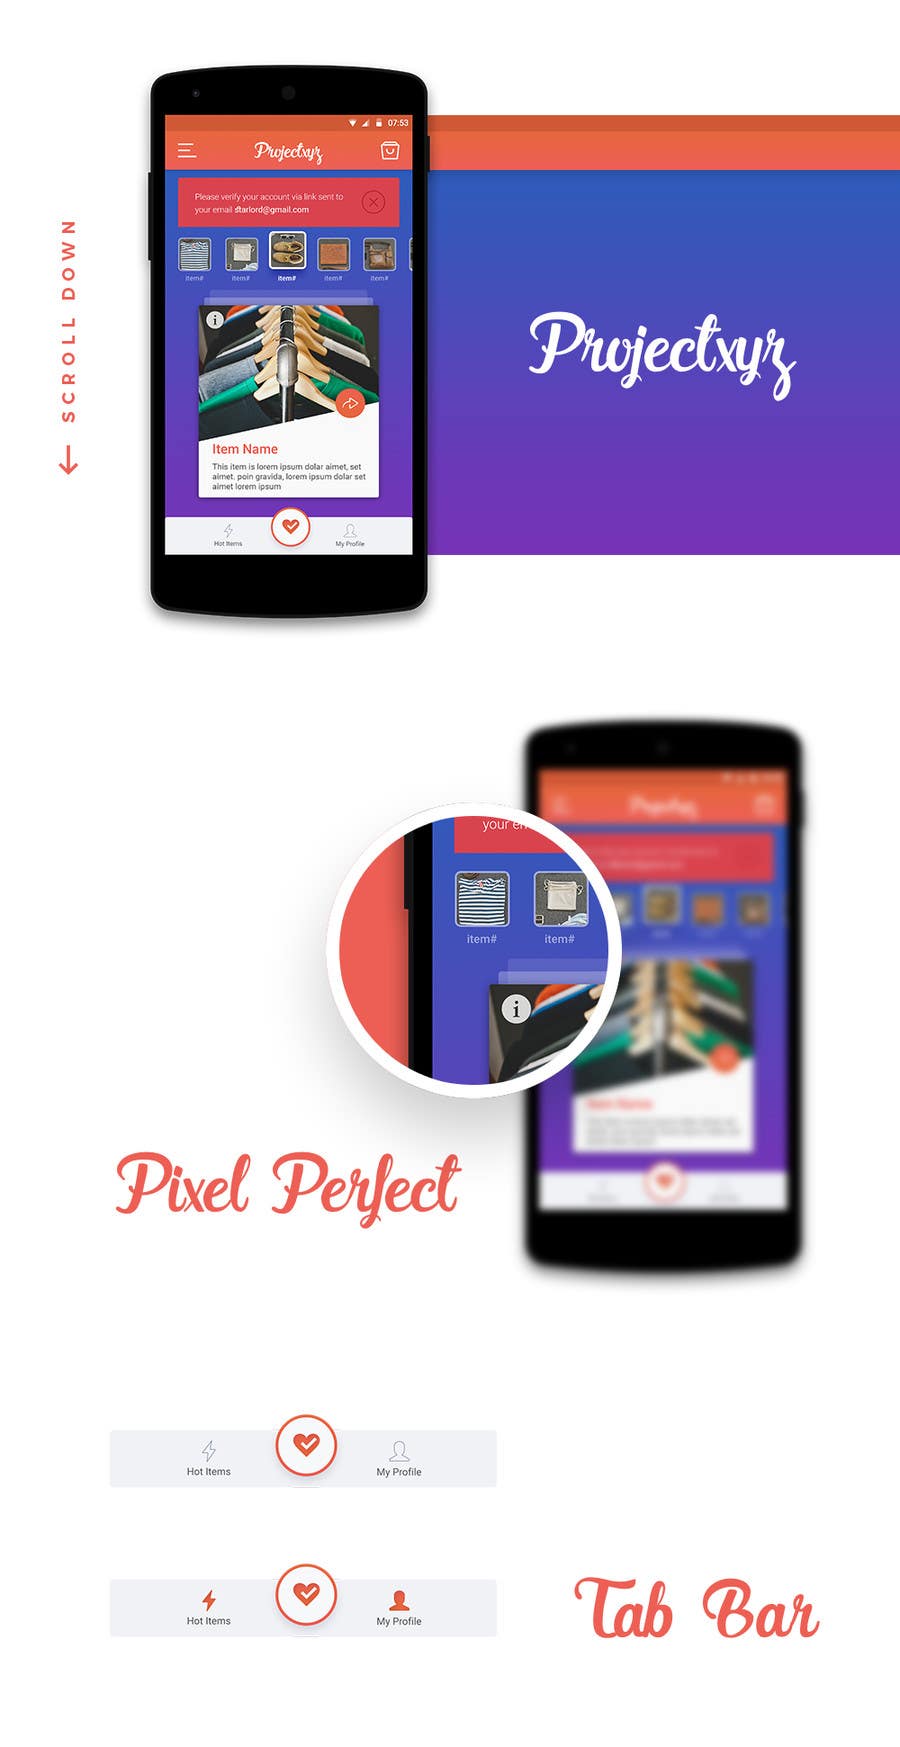 Proposition n°9 du concours                                                 Homescreen design for android application
                                            